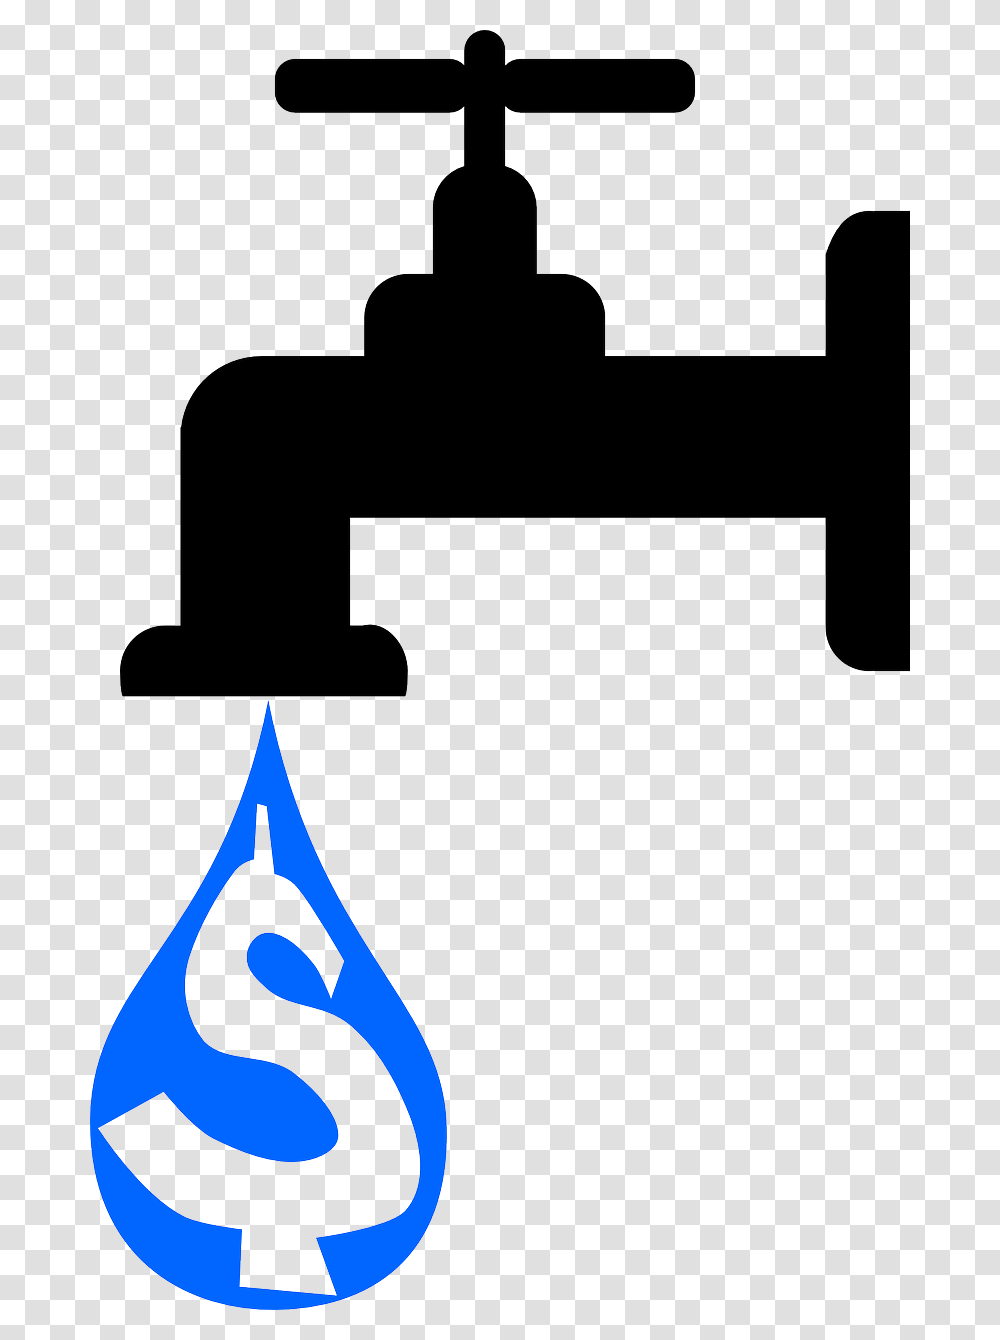 Tankless Water Heater Buying Guide, Indoors, Sink, Sink Faucet, Cross Transparent Png